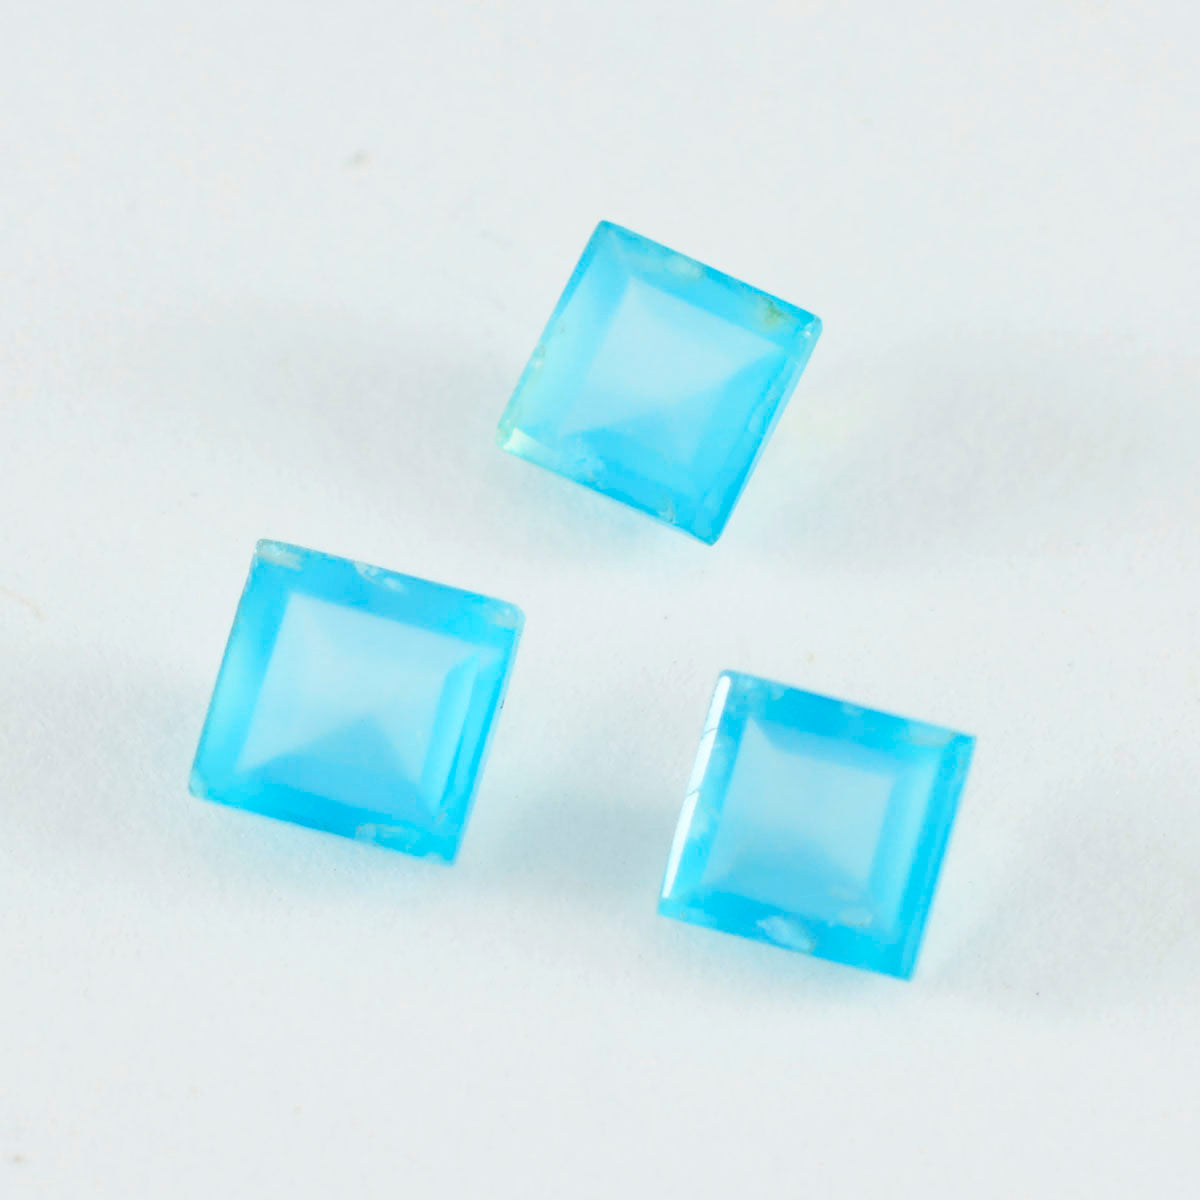 Riyogems 1PC Natural Blue Chalcedony Faceted 7x7 mm Square Shape A1 Quality Loose Gems